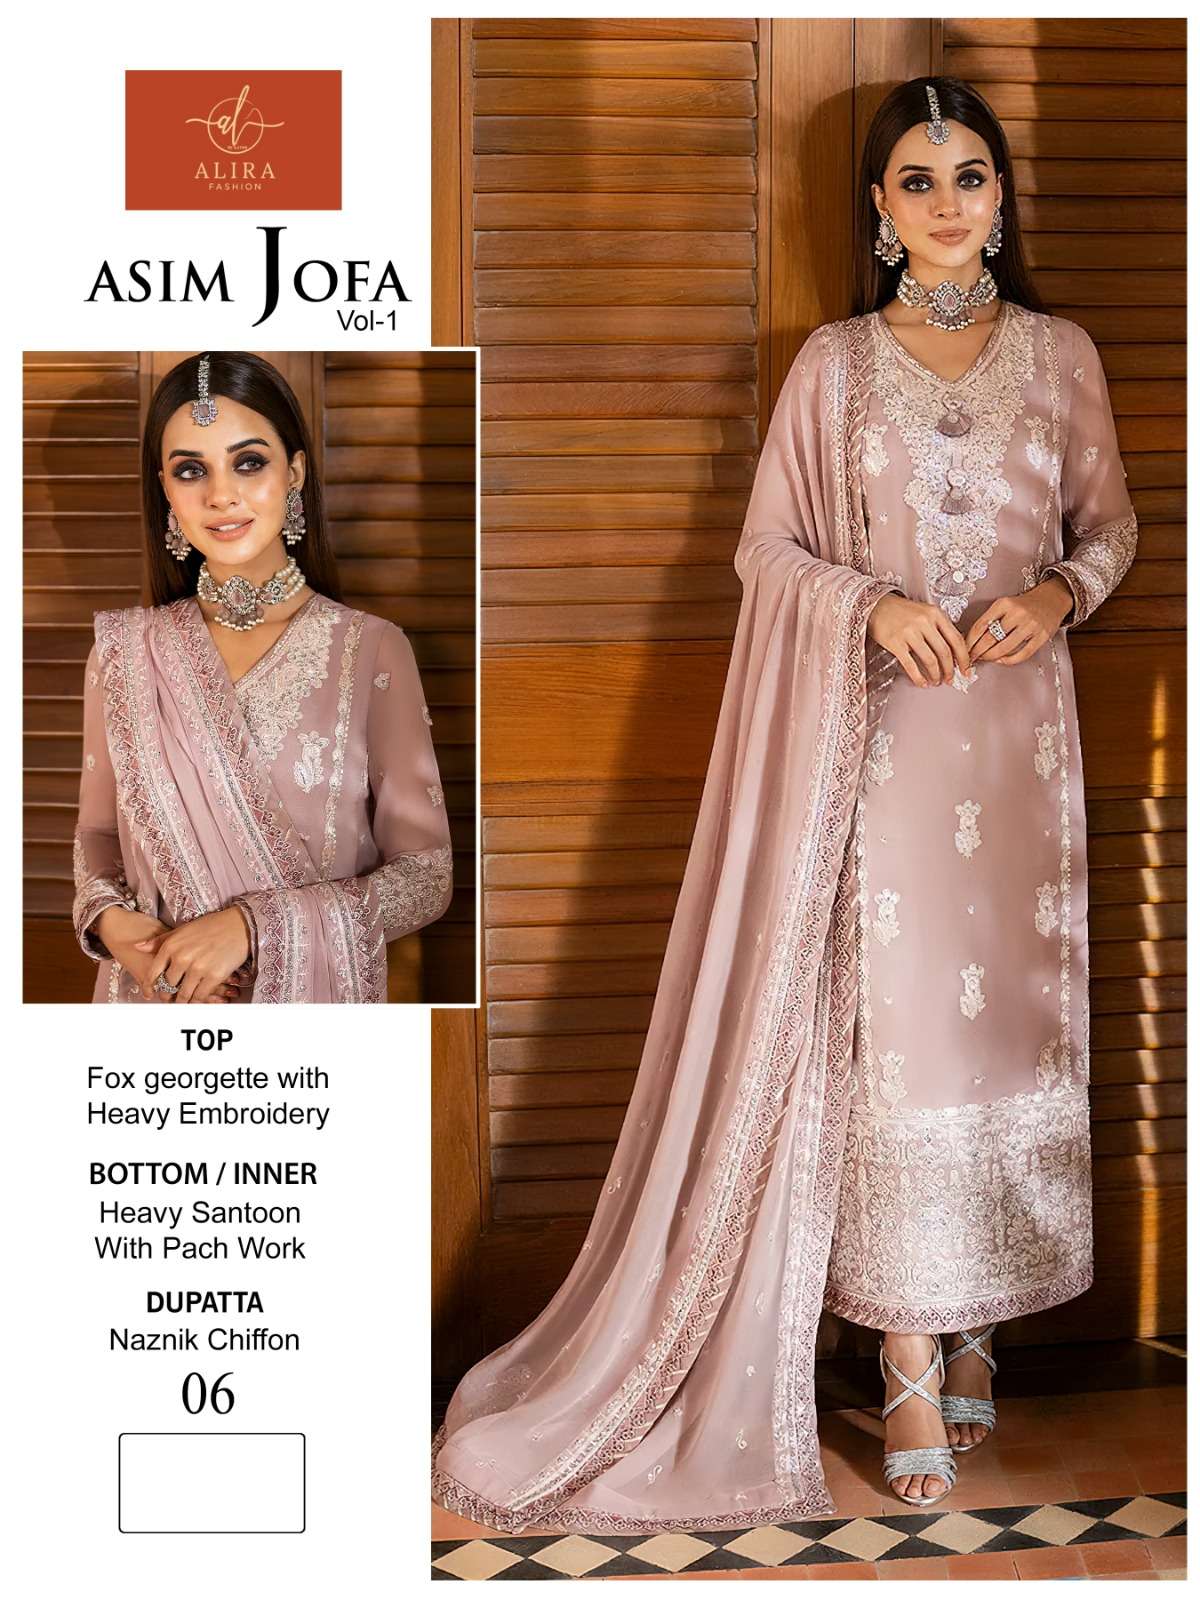 Asim Jofa Vol-1 By Alira 04 To 06 Series Beautiful Pakistani Suits Colorful Stylish Fancy Casual Wear & Ethnic Wear Faux Georgette Embroidered Dresses At Wholesale Price